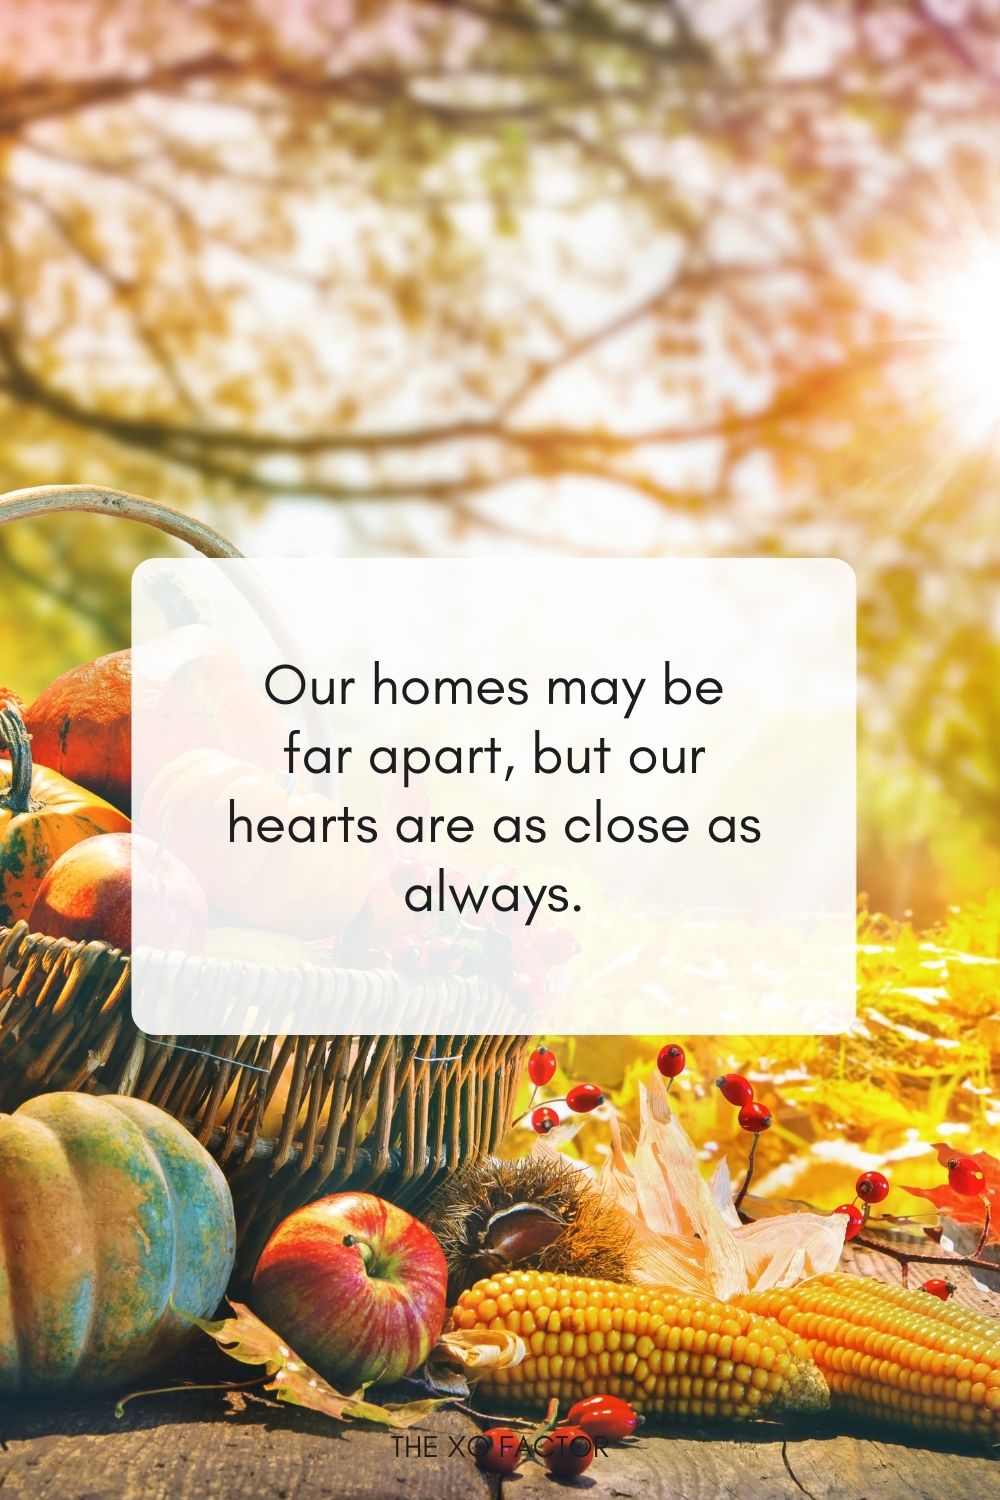 Our homes may be far apart, but our hearts are as close as always.